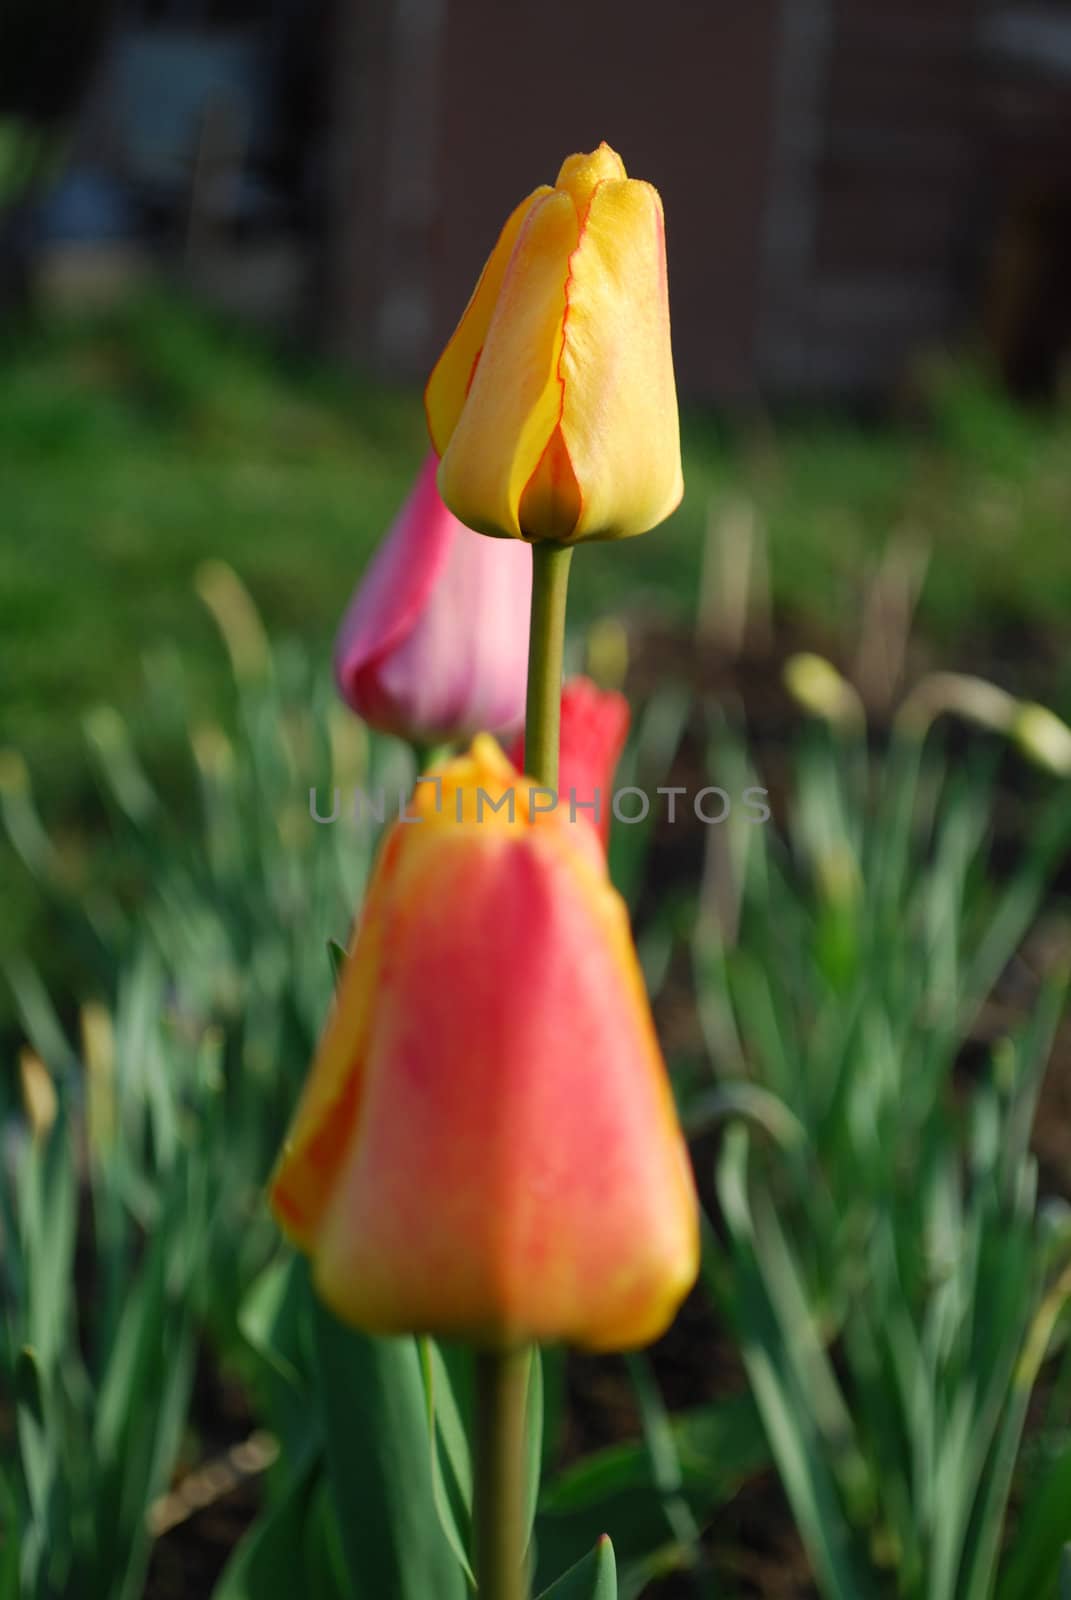 closed tulips with morning dew in a row with focus on a yellow tulip in the middle